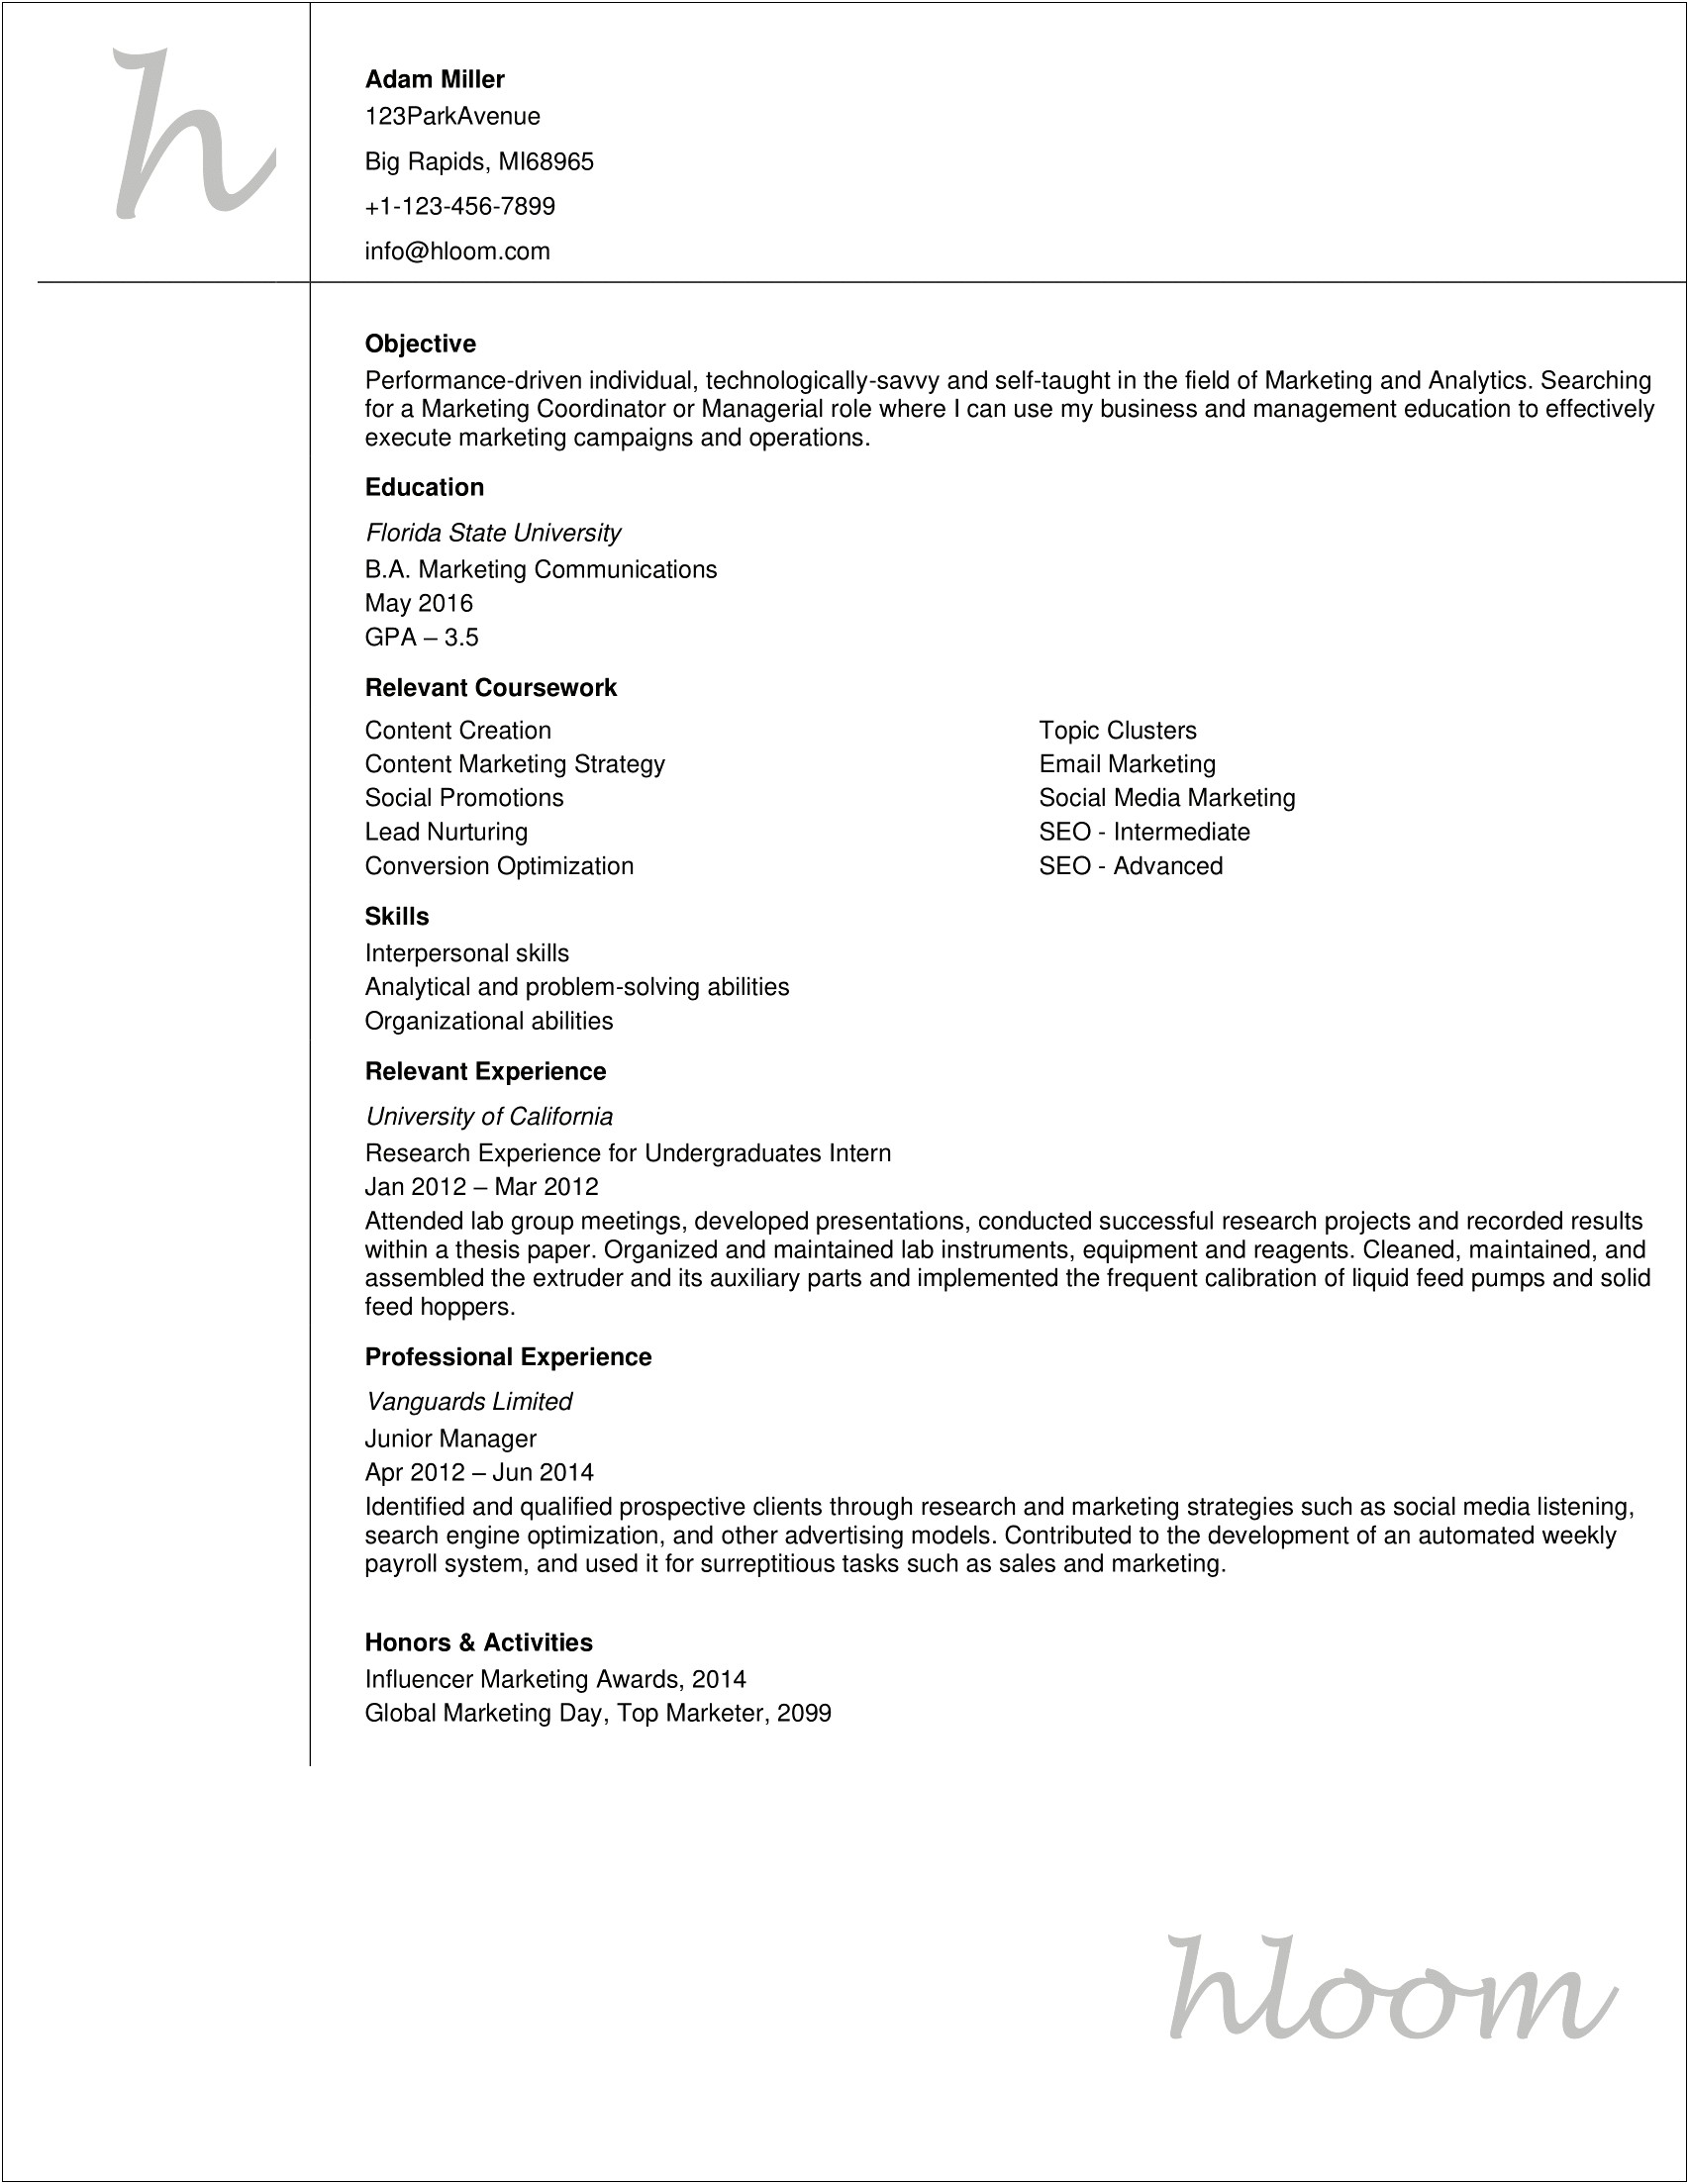 Profile Sections Of Resume Examples